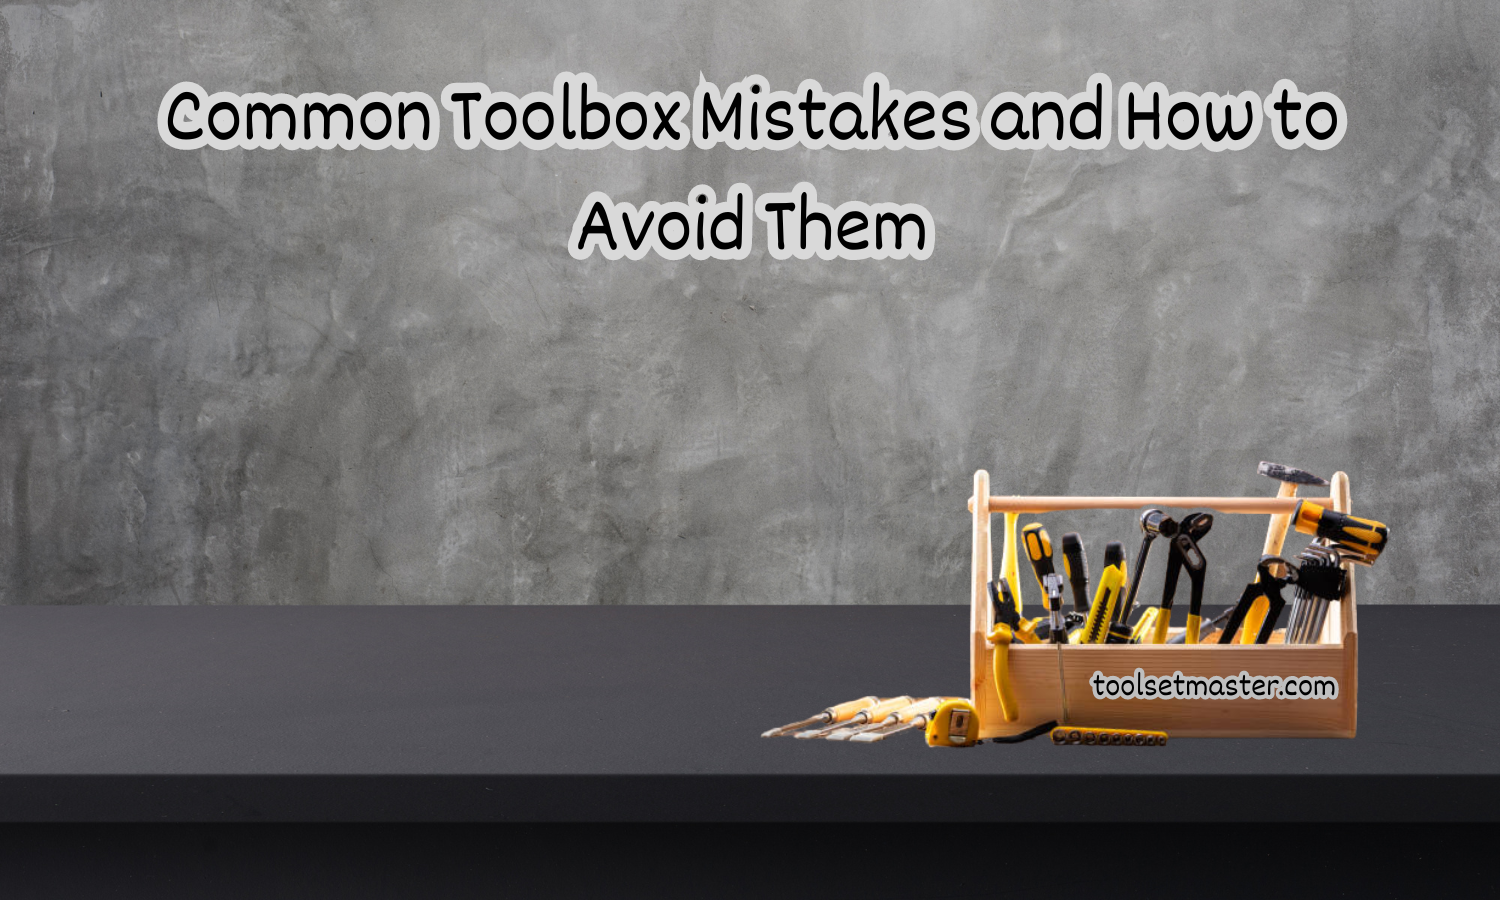 Common Toolbox Mistakes